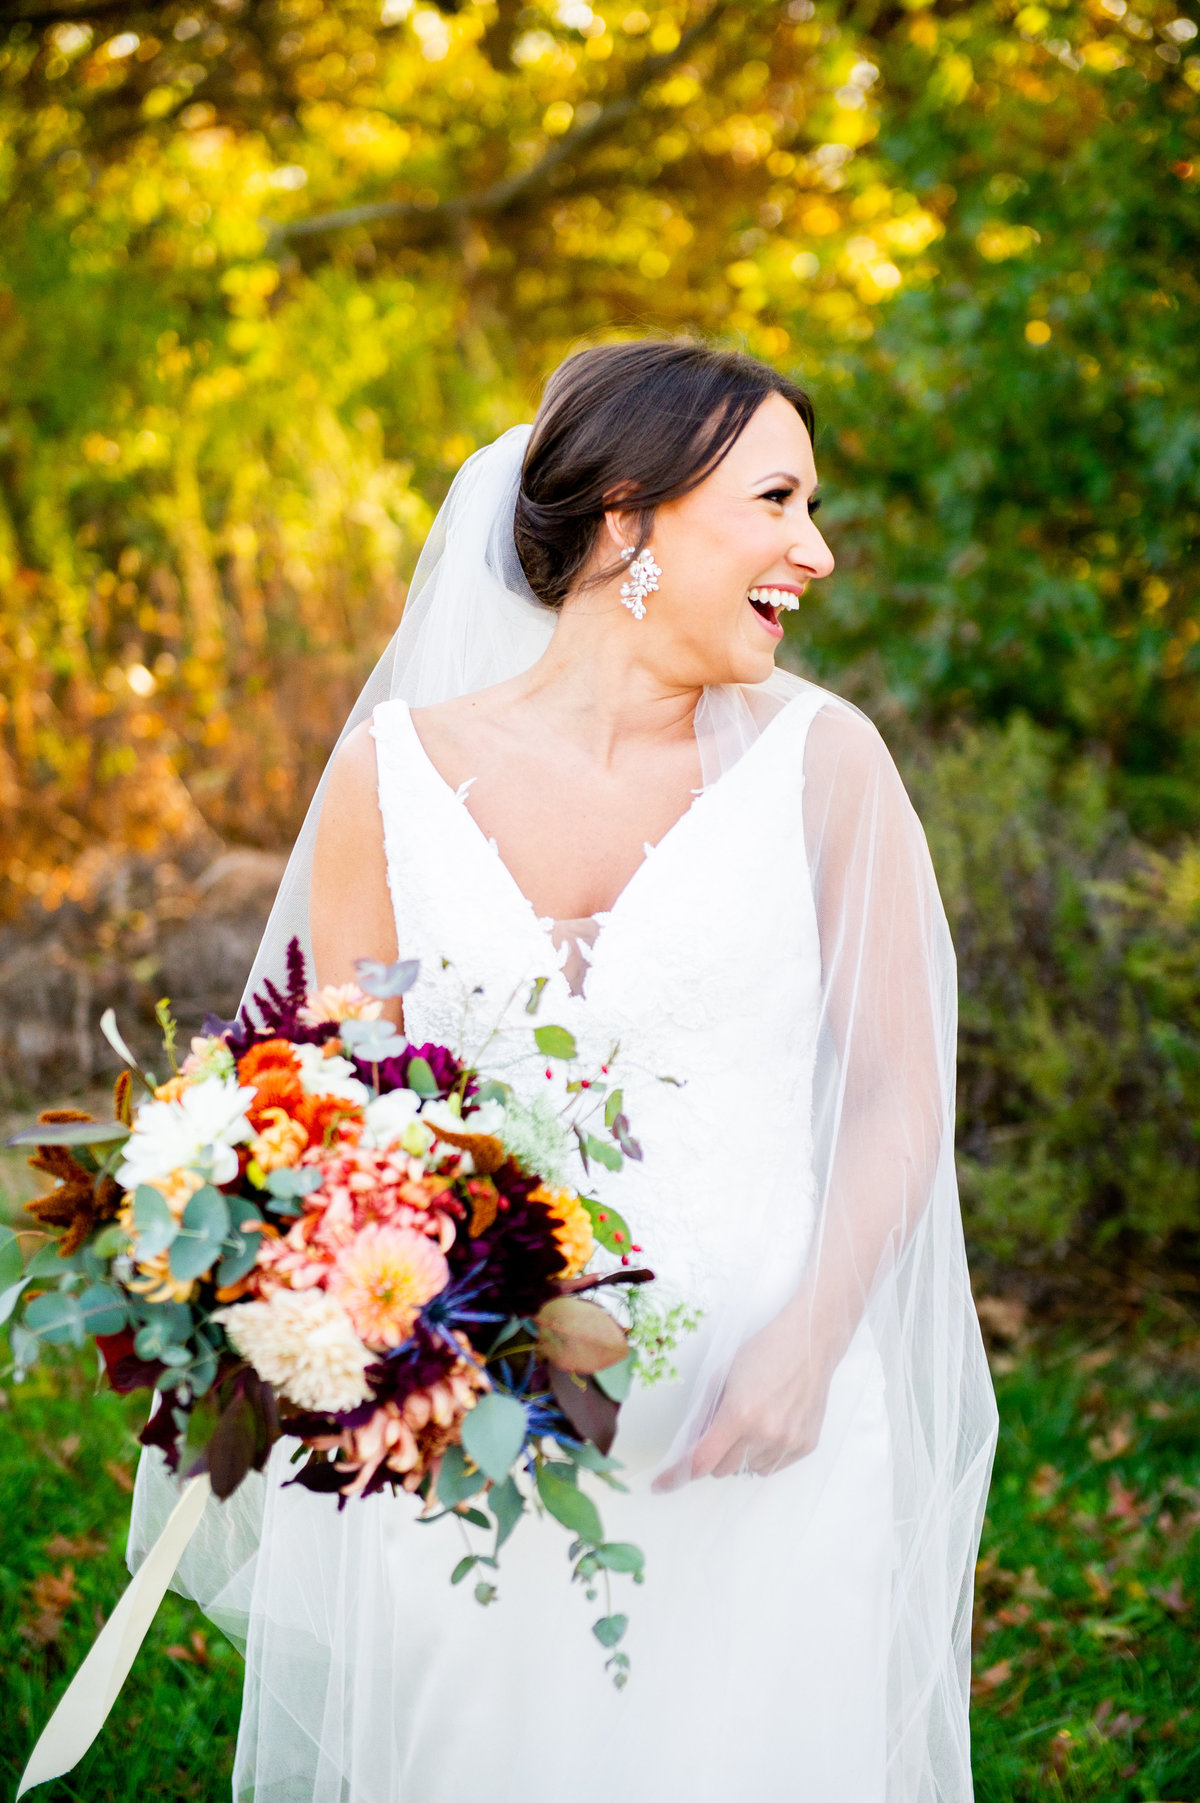 fall bride looks to side and laughs